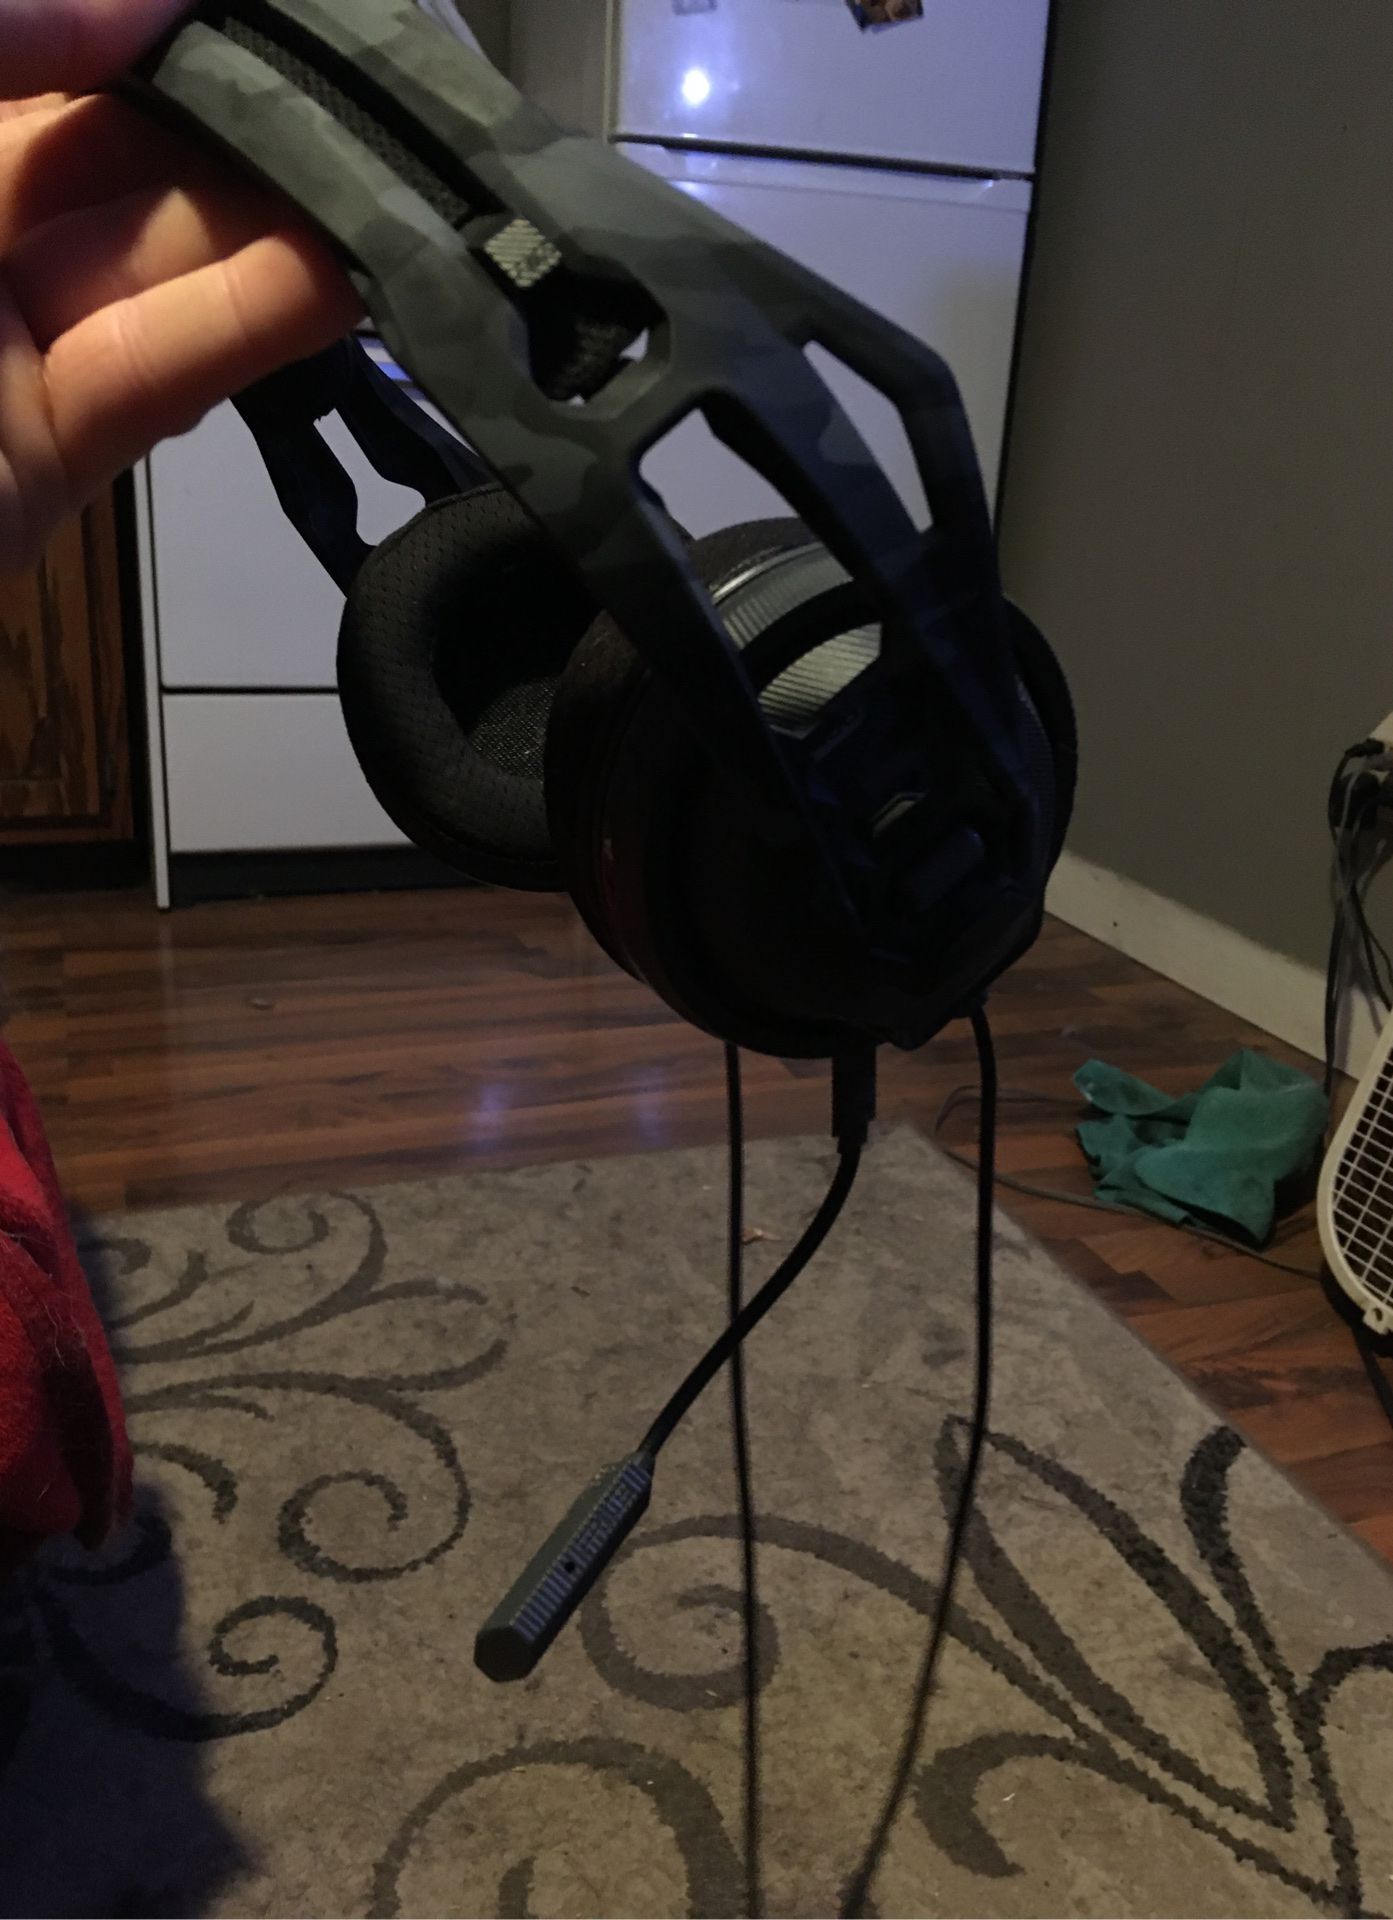 400 rig gaming headset used